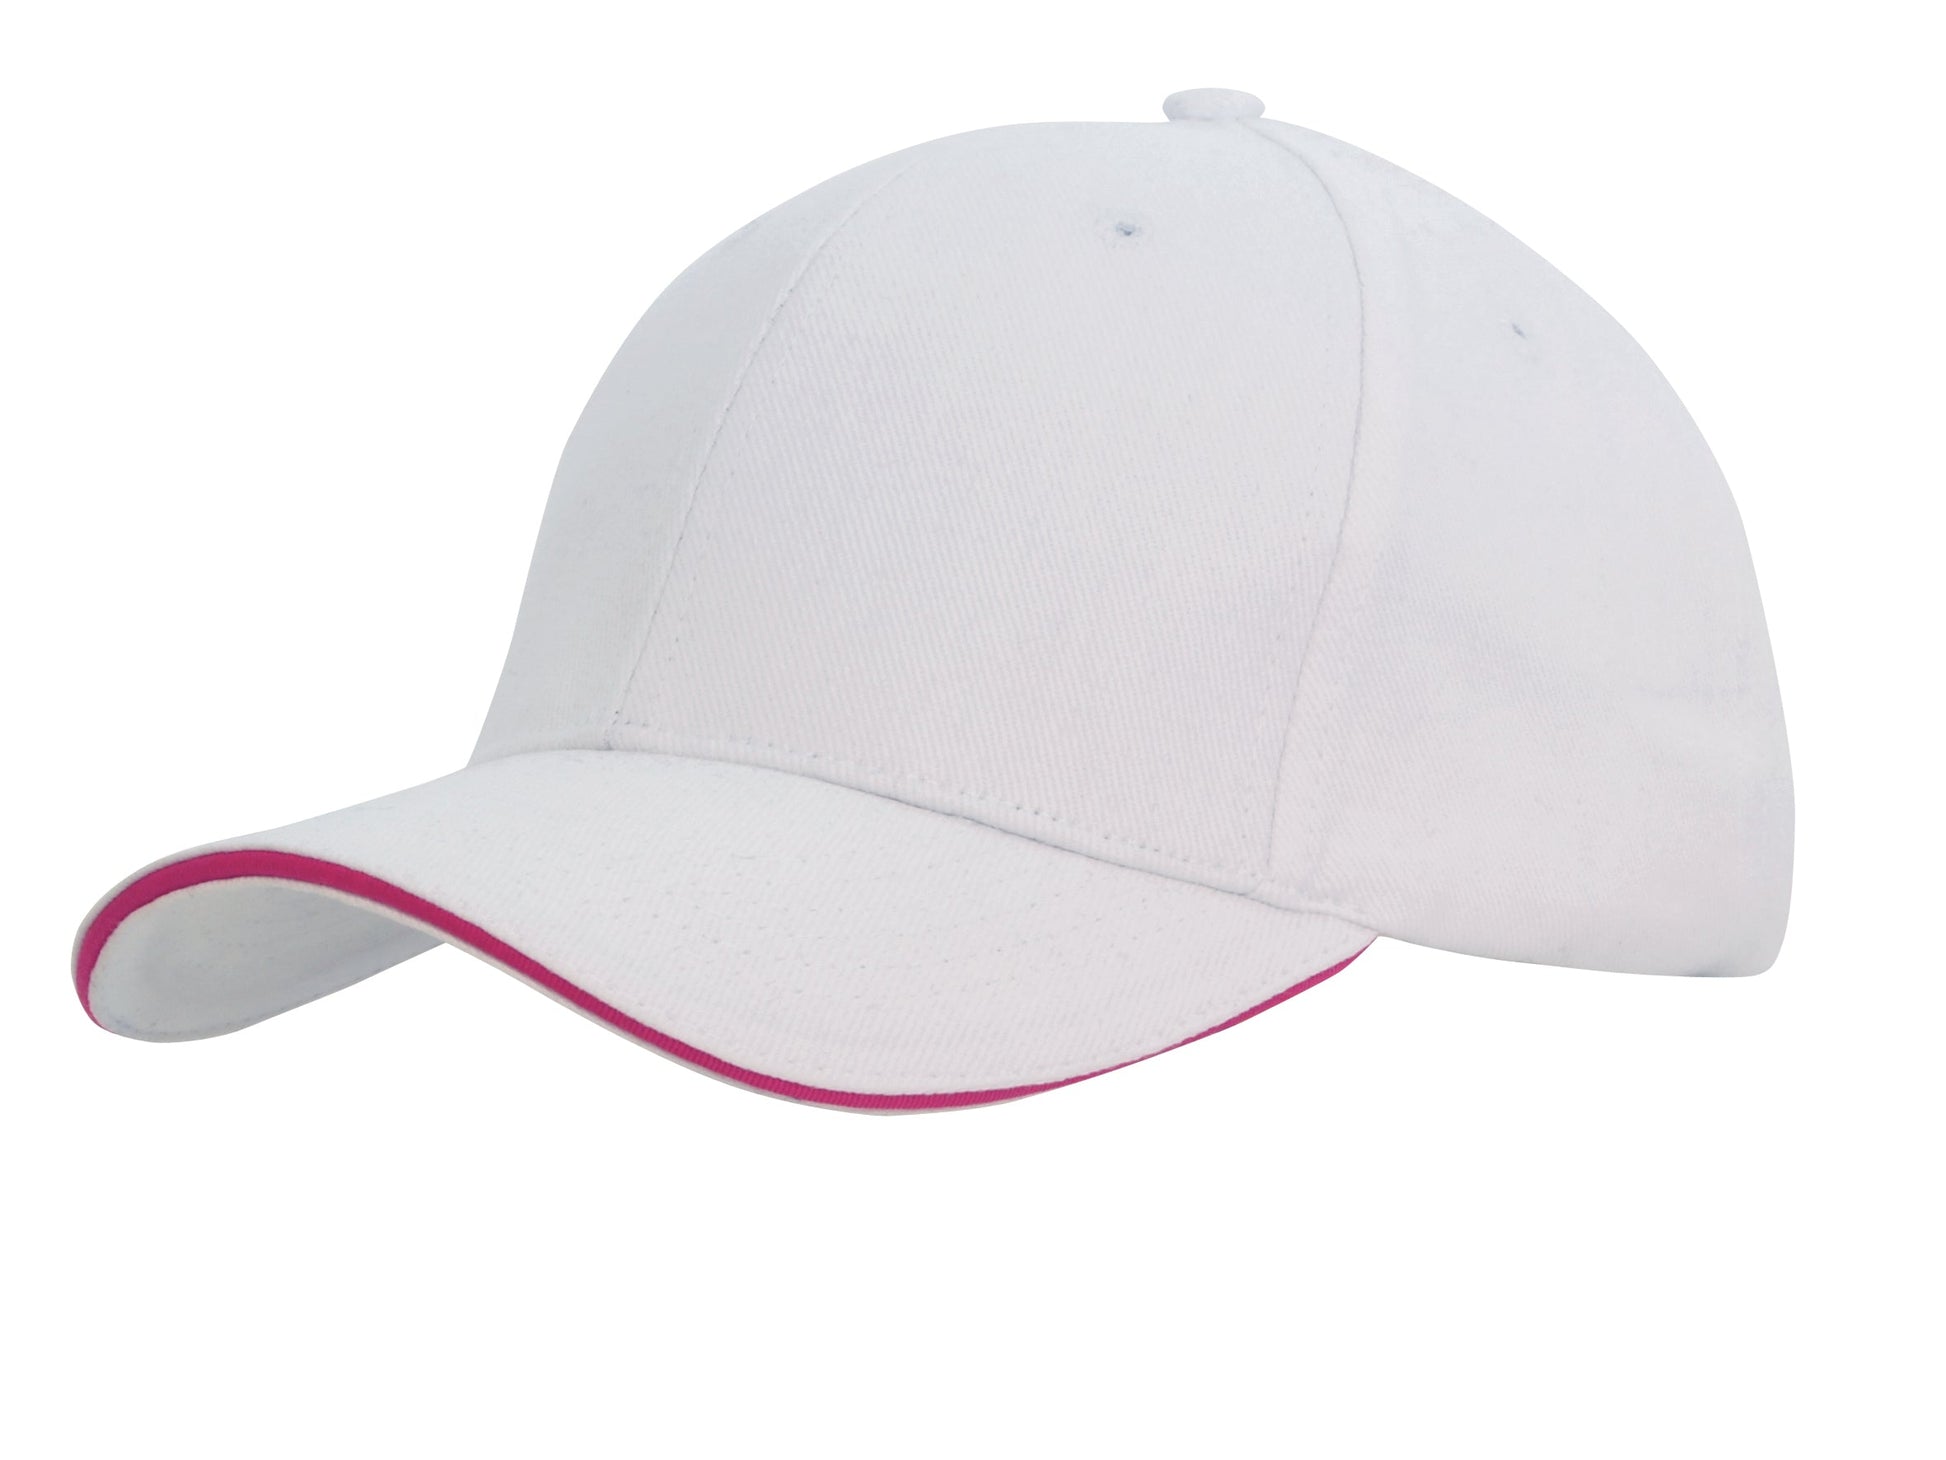 Headwear Brushed Heavy Cotton Cap With Sandwich Trim X12 - 4210 Cap Headwear Professionals White/Hot Pink One Size 